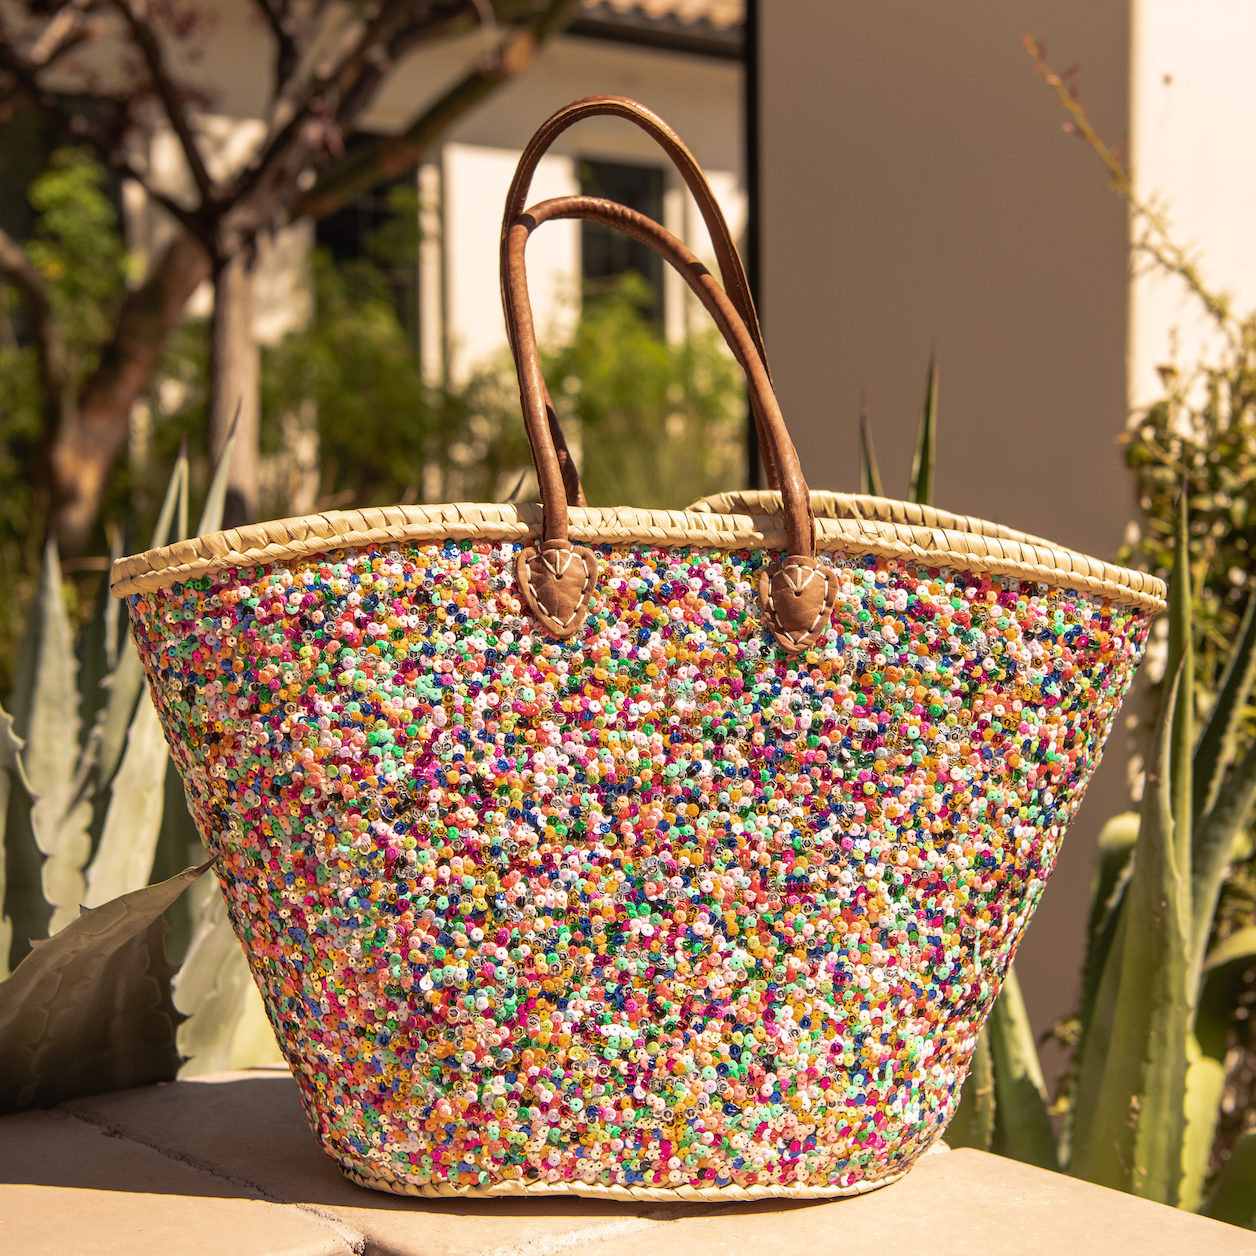 Large Straw Shoulder Bag with Multi-Colored Sequins sitting on ledge with green cactus behind 